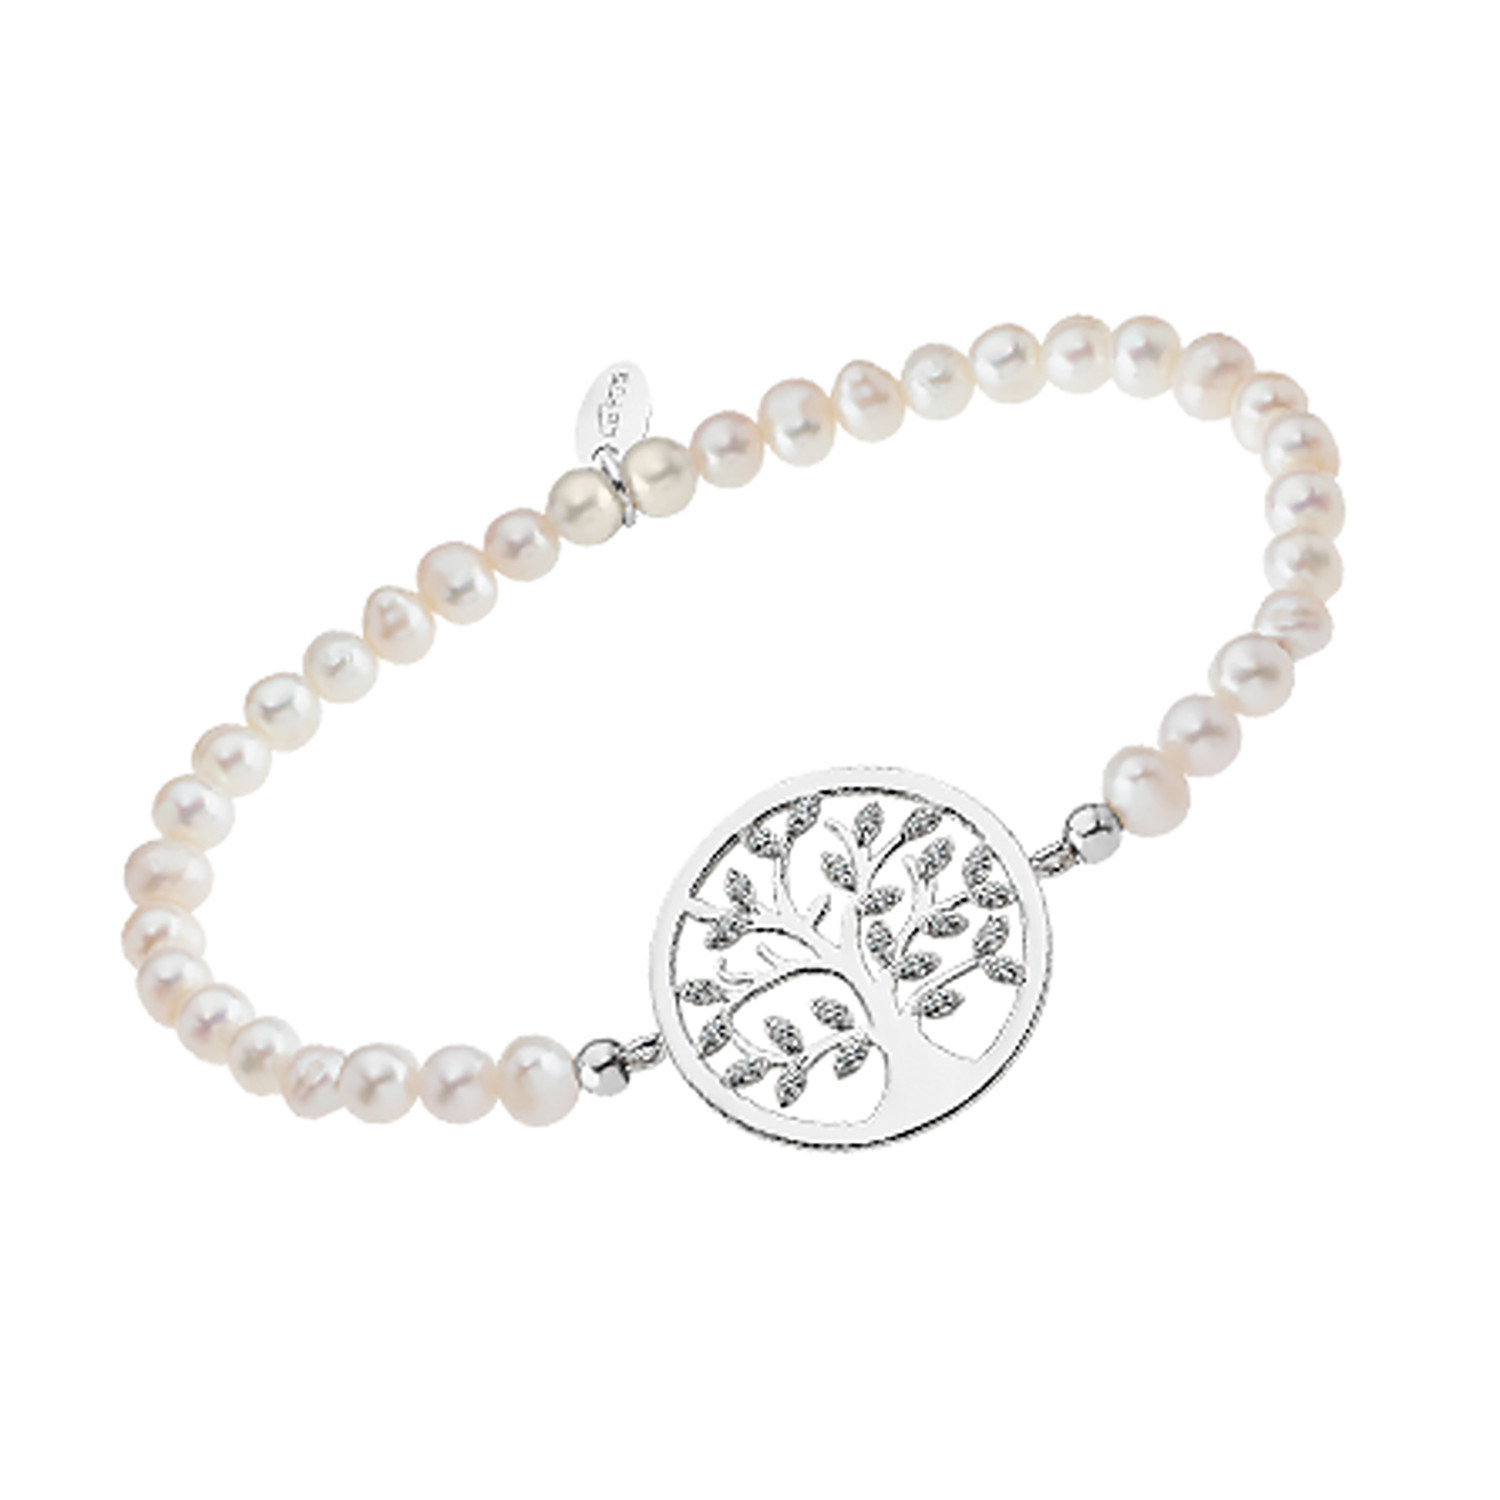 Bracelet Lotus Silver Collection Family Tree perles